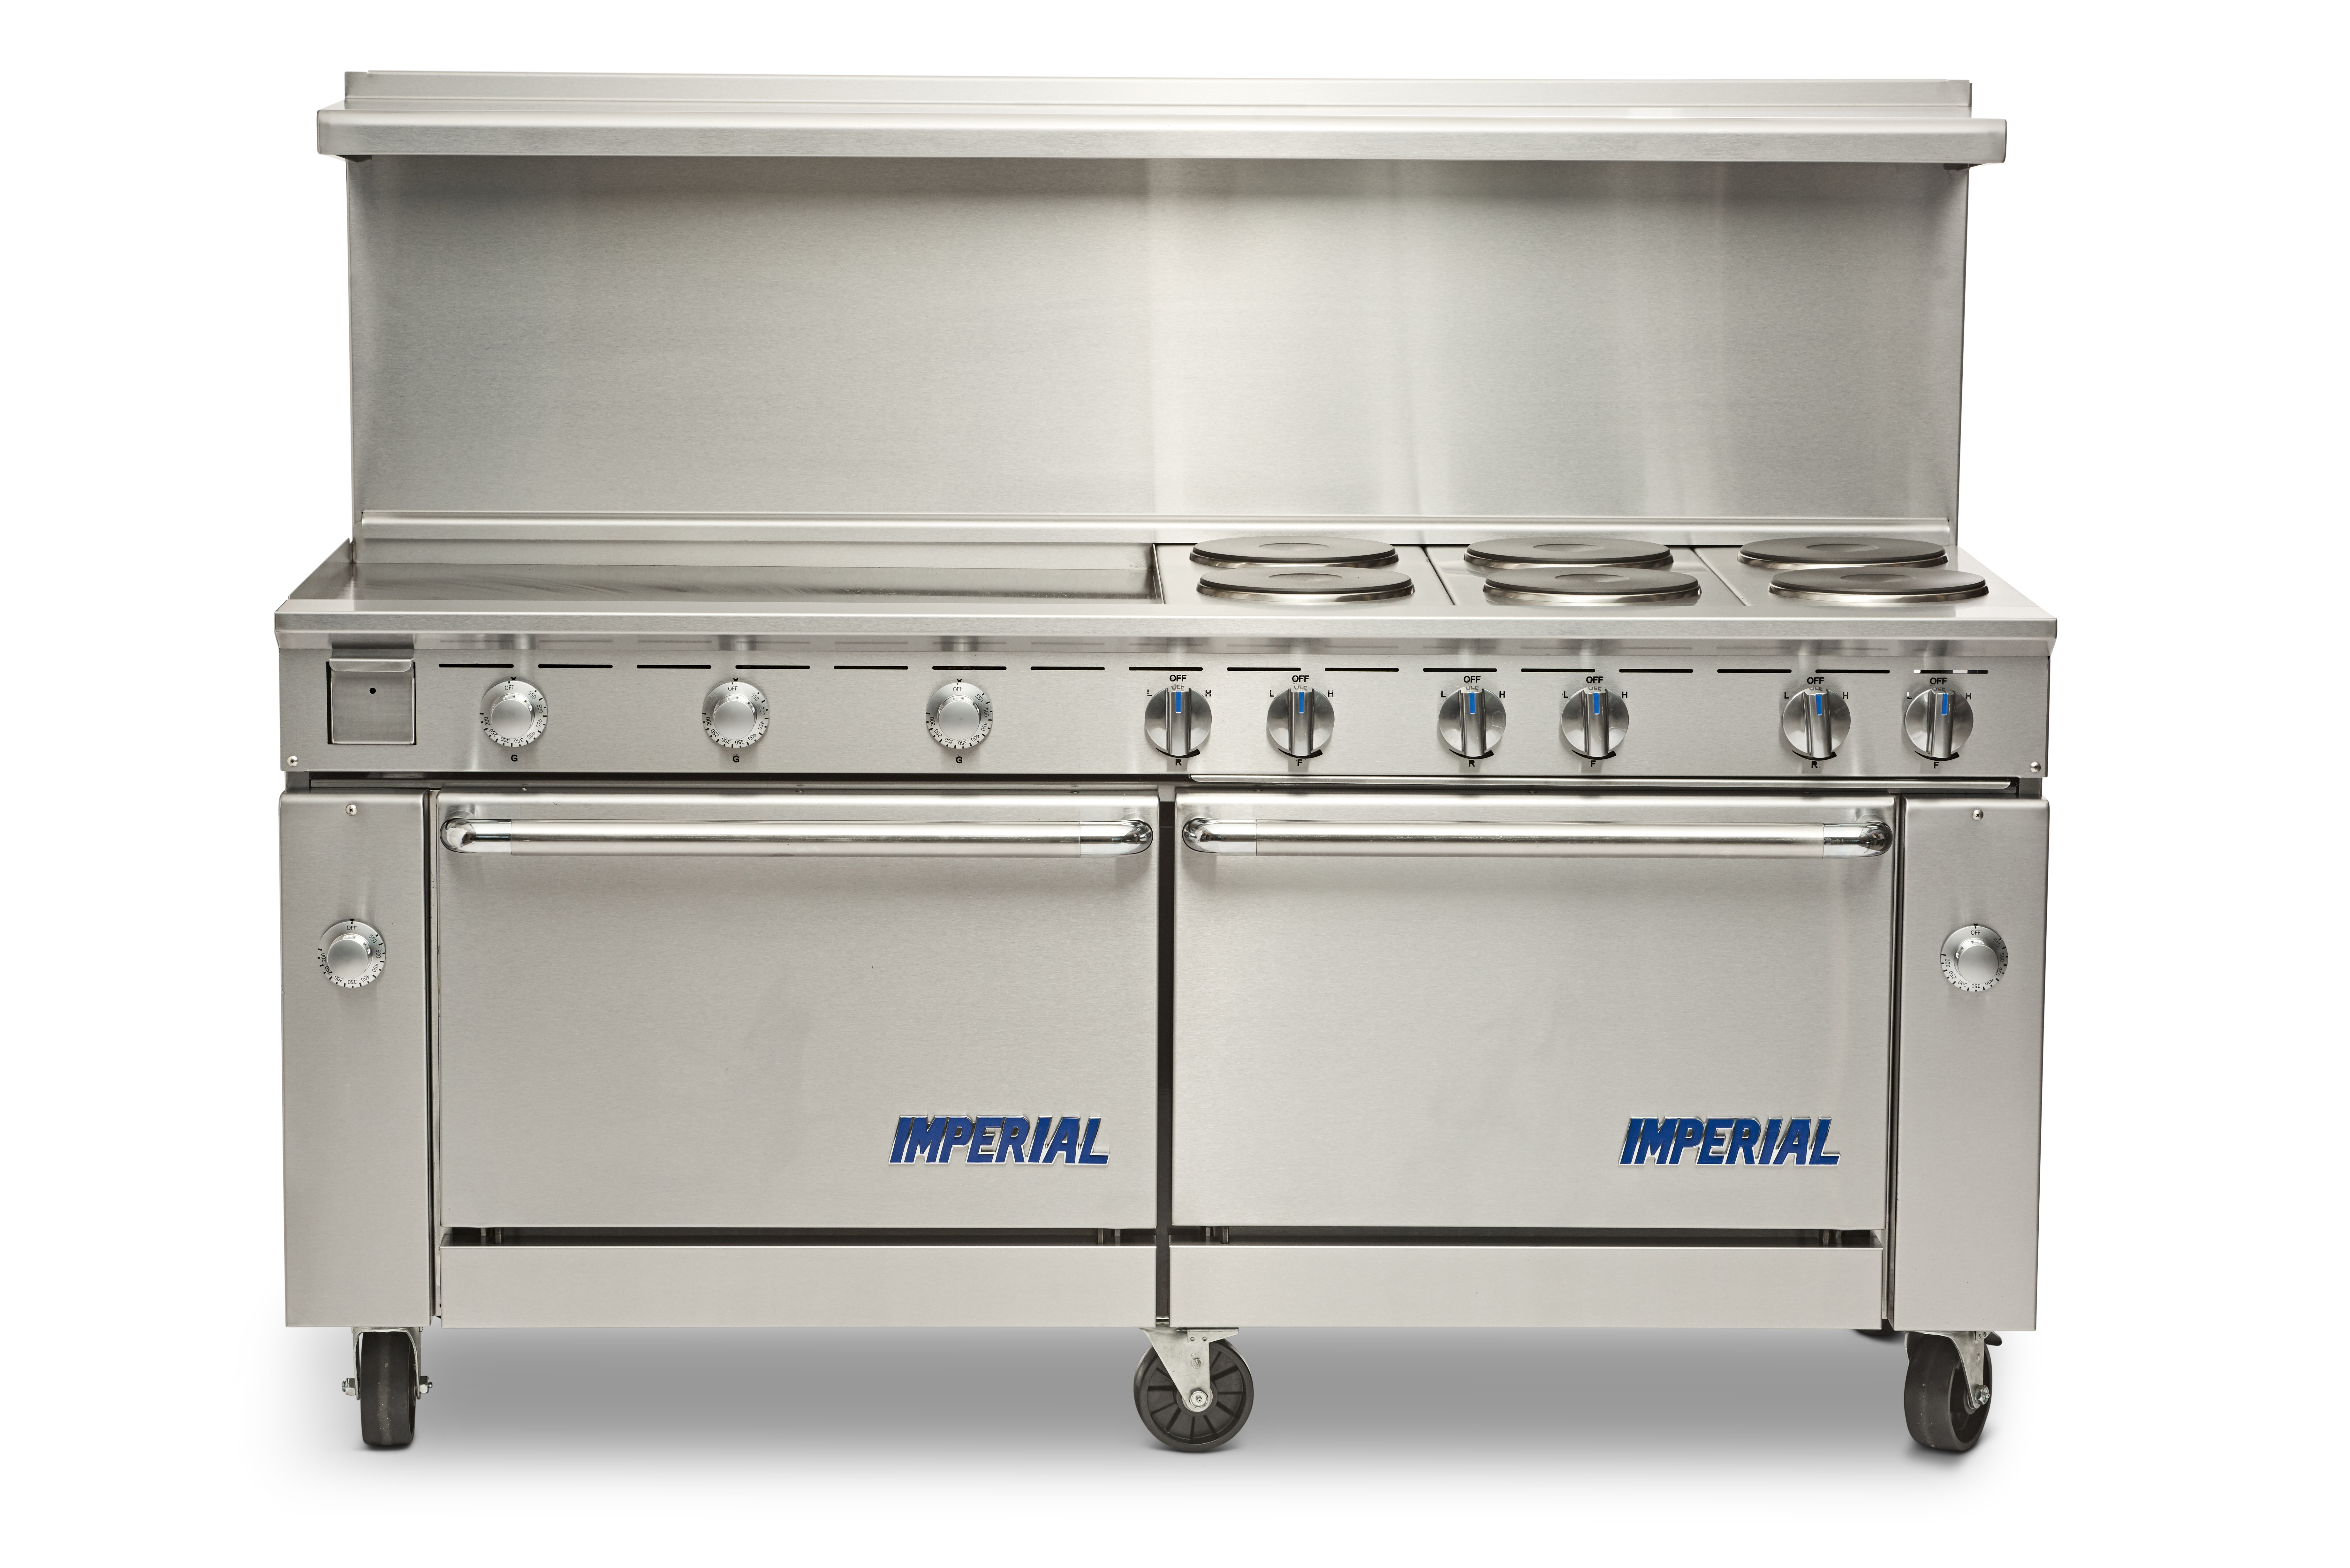 72 Gas Range, 6 Burner and 36 Thermostatic Griddle Top with 2